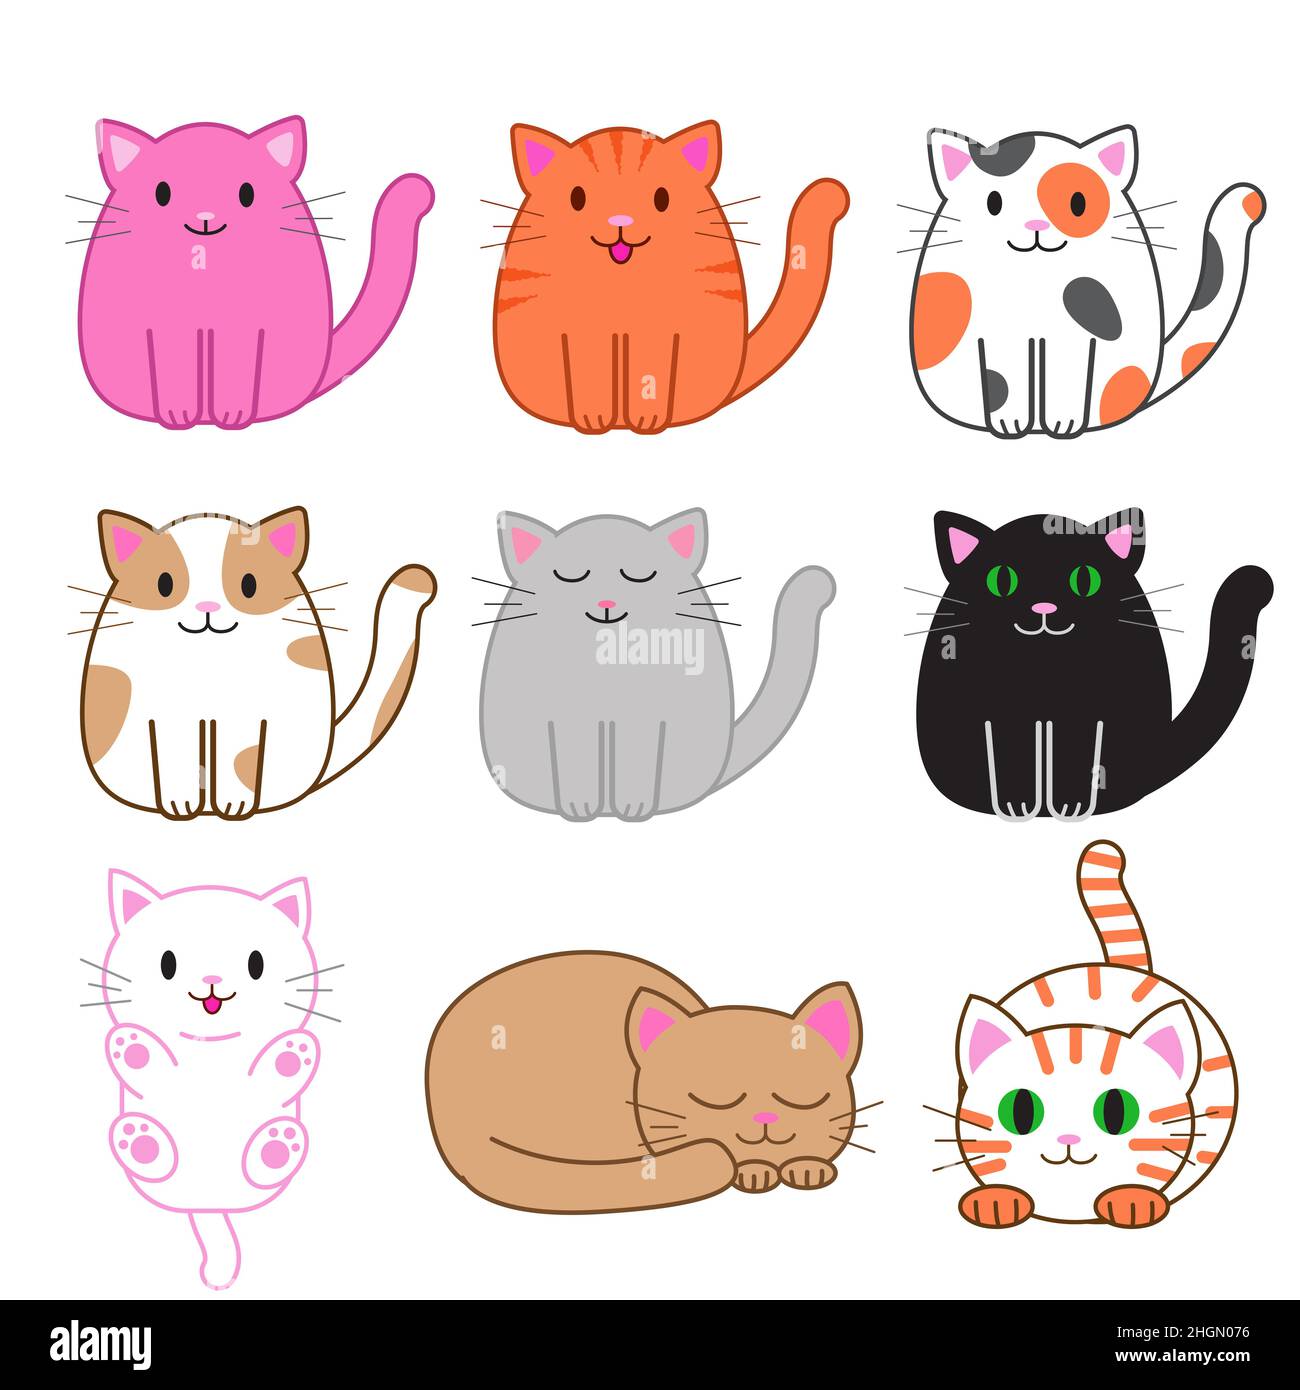 Set of funny cartoon cats, cute vector illustration in flat style. Different colorful cats. Smiling fat kitten. Positive print for sticker, cards Stock Vector